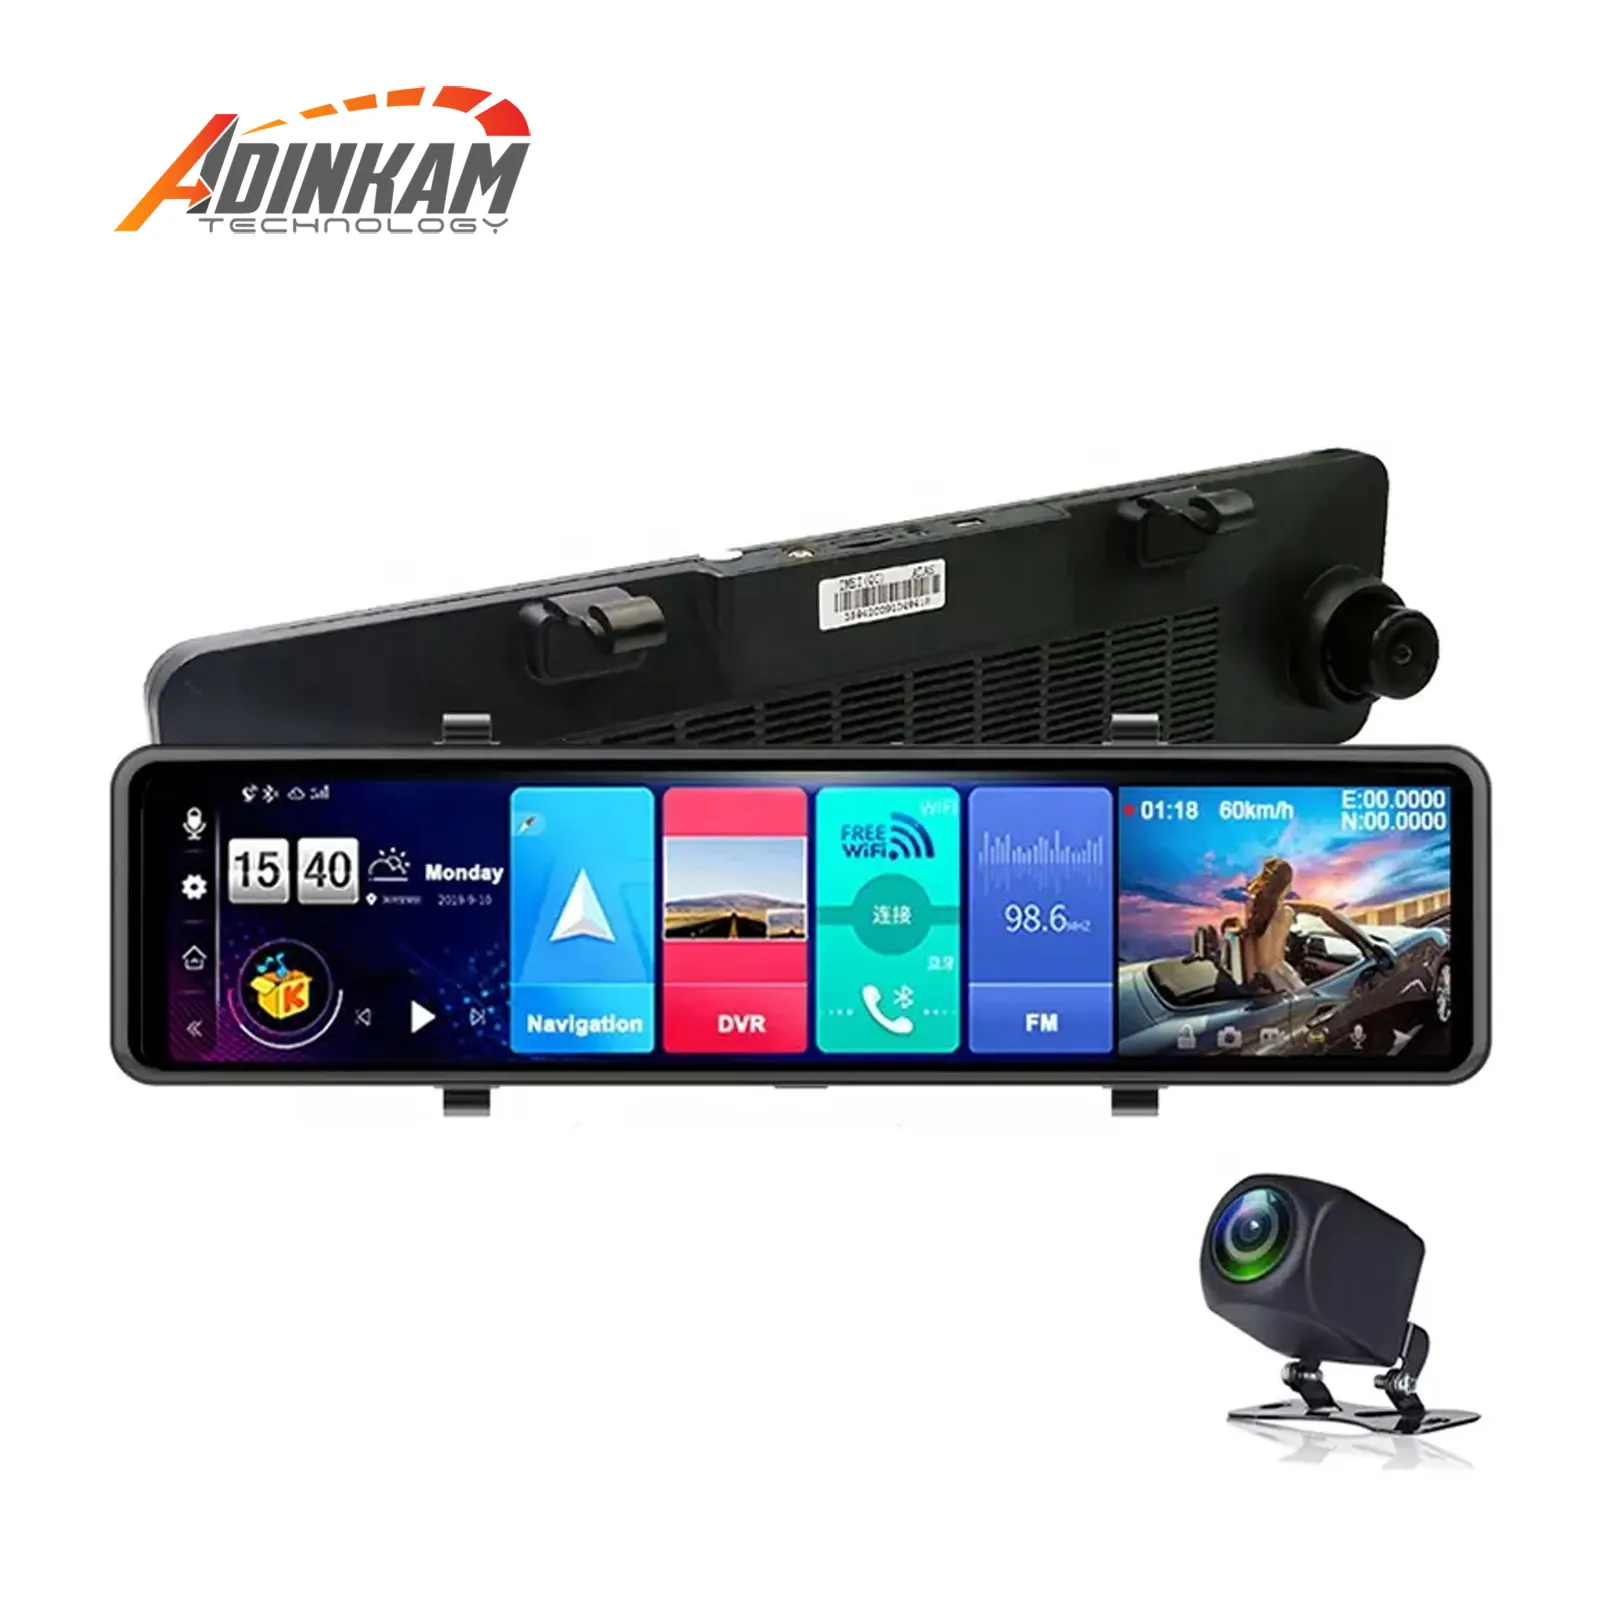 Firstscene V-26A New Triple screen 4G Android 8.1 Car Rearview Mirror Camera 12 ADAS DVR Dashcam Wifi GPS Tracker Video Recorder